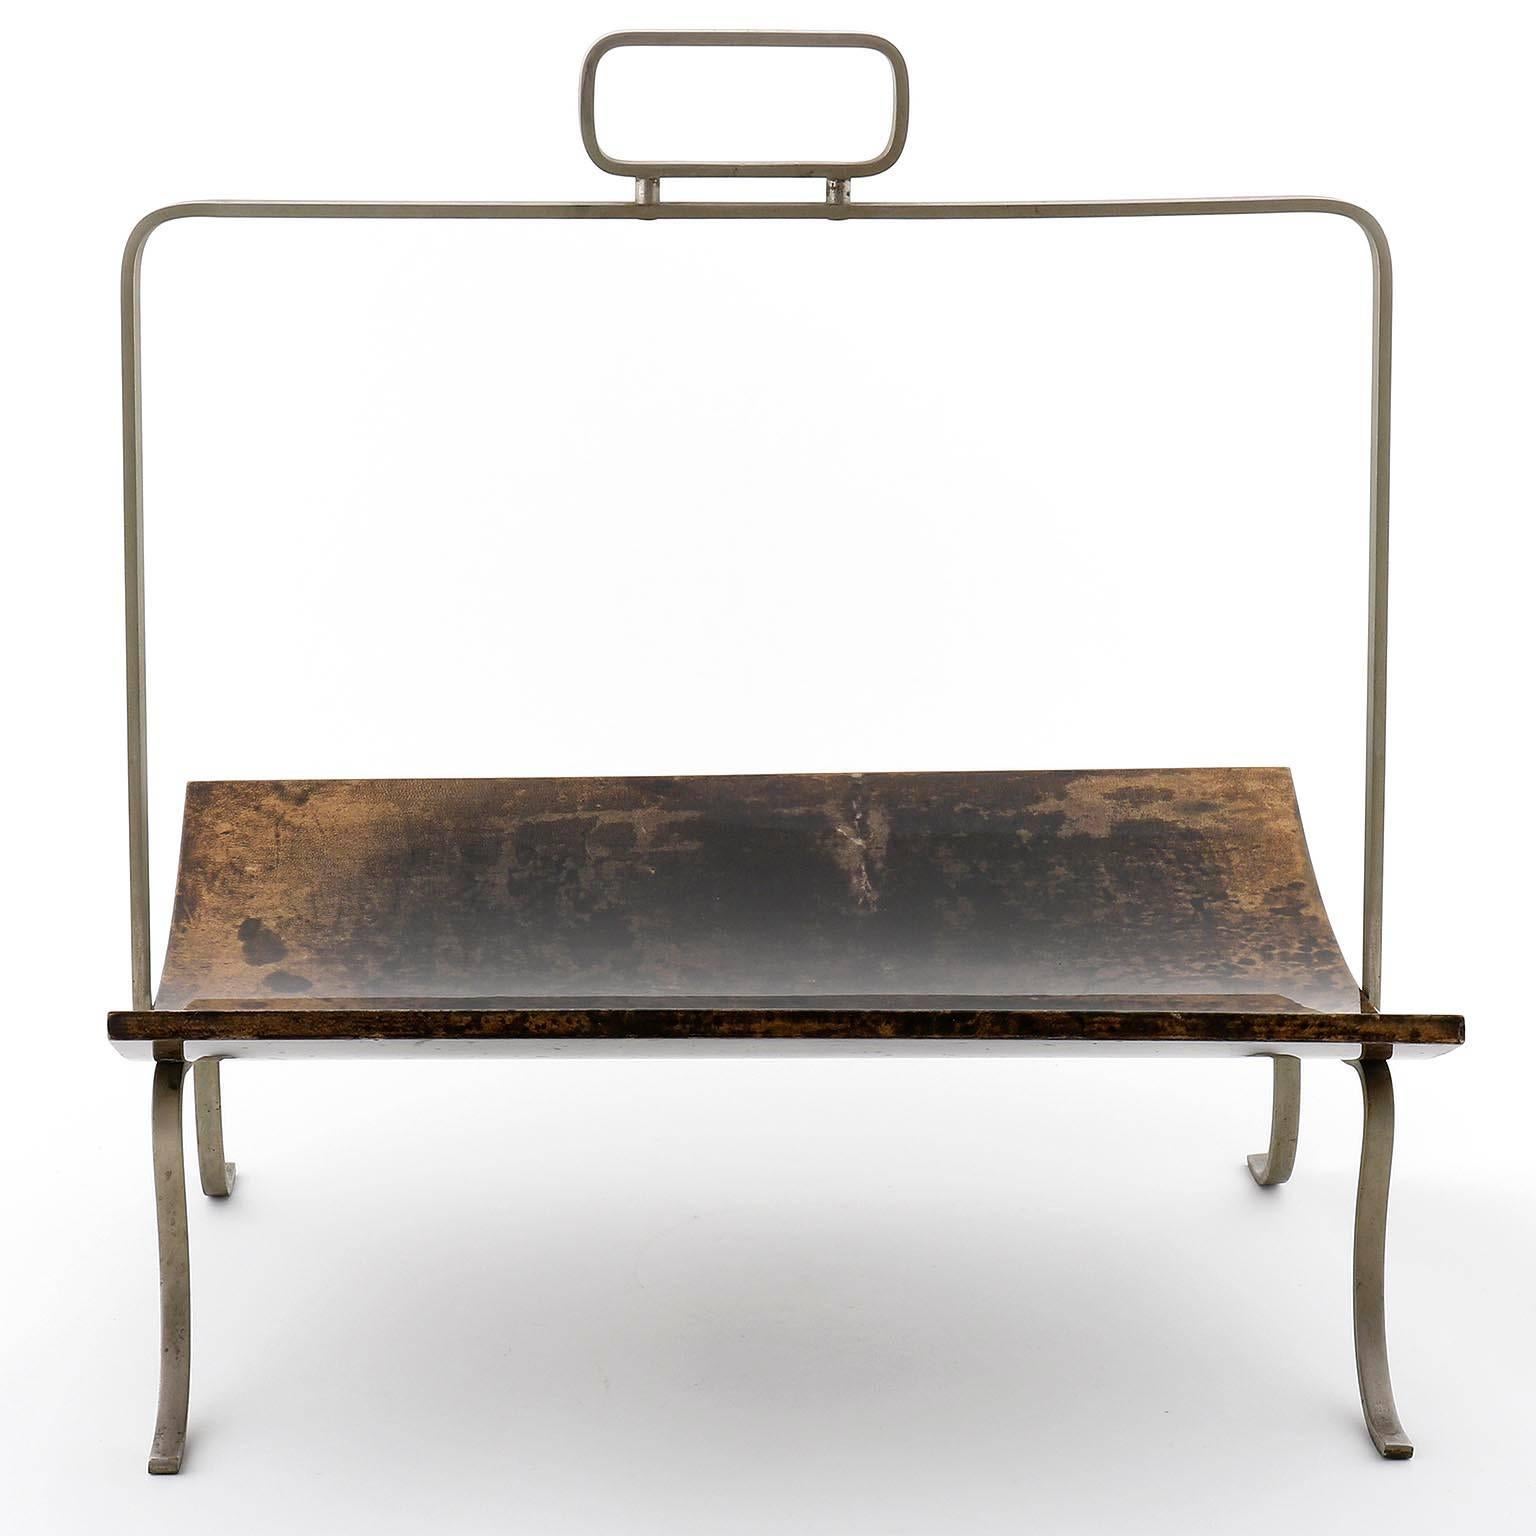 An Italian newspaper stand by Aldo Tura, manufactured in Mid-Century, circa 1970 (1960s-1970s).
The stand is made of natural aged nickel plated brass with lovely patina. The shelf is made of a bent wood which is covered by goatskin and lacquered